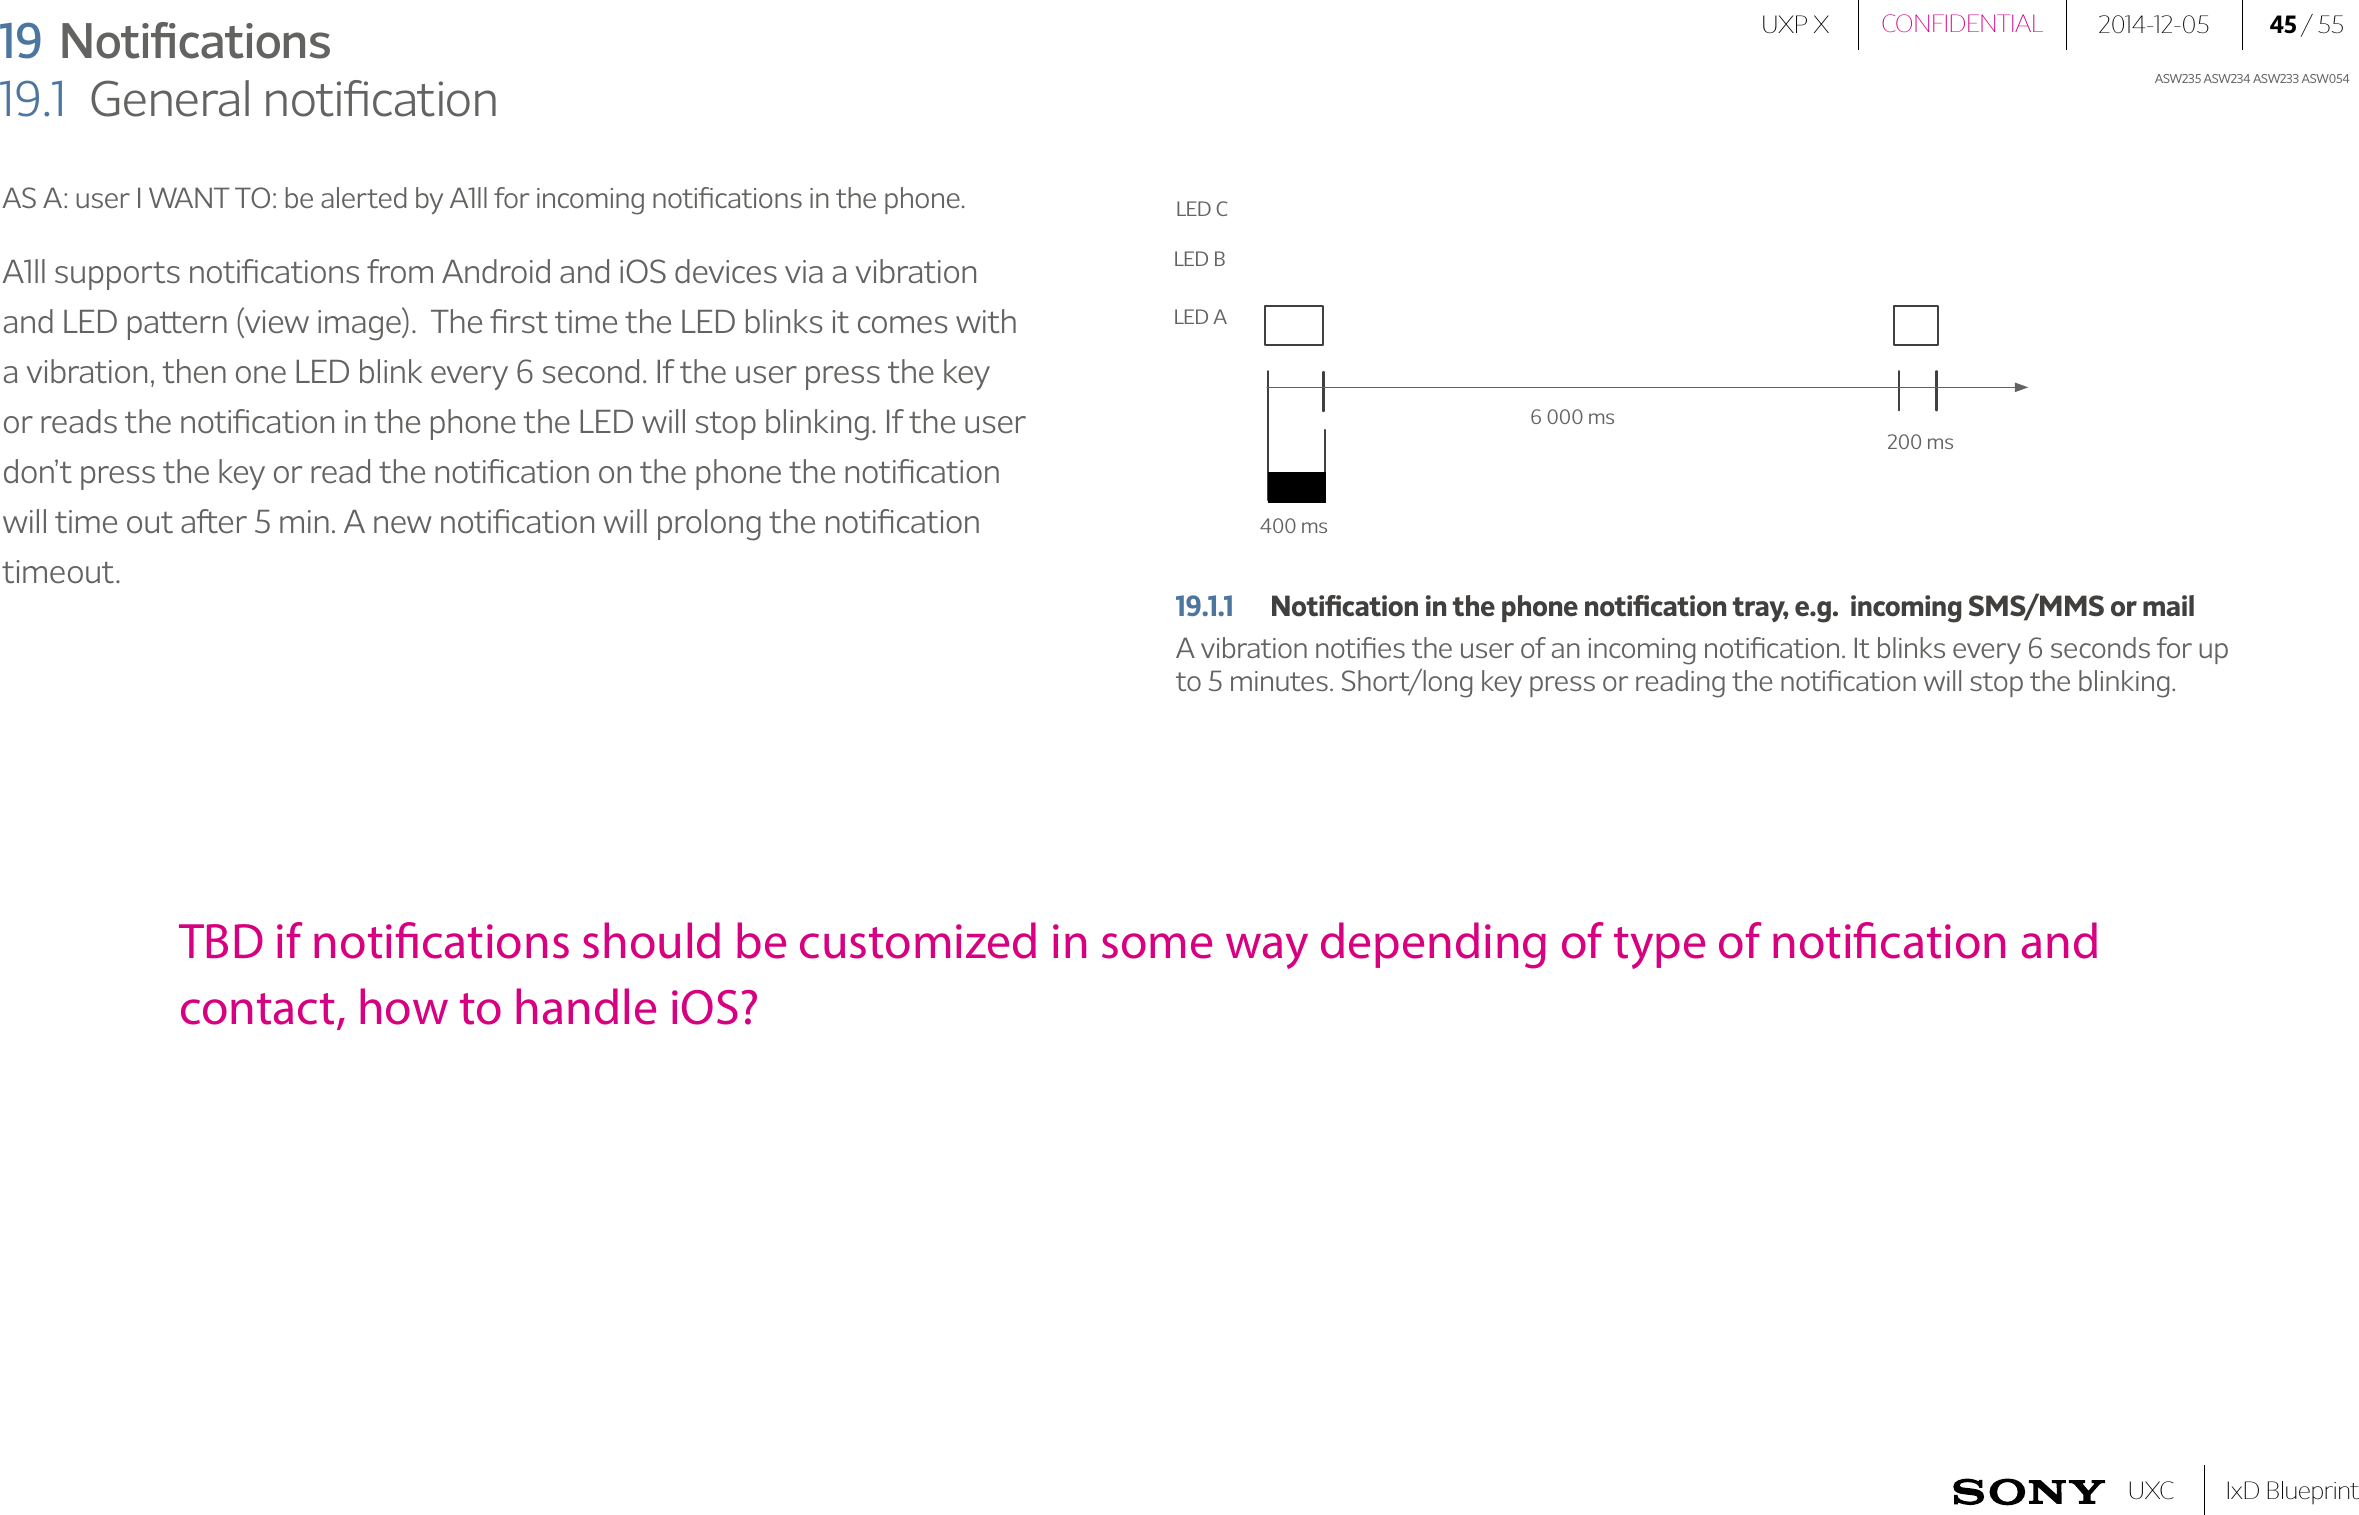 UXP X 2014-12-05 45 / 55IxD BlueprintUXCCONFIDENTIALASW235 ASW234 ASW233 ASW054AS A: user I WANT TO: be alerted by A1ll for incoming notiﬁcations in the phone.A1ll supports notiﬁcations from Android and iOS devices via a vibration and LED pattern (view image).  The ﬁrst time the LED blinks it comes with a vibration, then one LED blink every 6 second. If the user press the key or reads the notiﬁcation in the phone the LED will stop blinking. If the user don’t press the key or read the notiﬁcation on the phone the notiﬁcation will time out after 5 min. A new notiﬁcation will prolong the notiﬁcation timeout. 19 Notiﬁcations19.1  General notiﬁcation19.1.1   Notiﬁcation in the phone notiﬁcation tray, e.g.  incoming SMS/MMS or mail A vibration notiﬁes the user of an incoming notiﬁcation. It blinks every 6 seconds for up to 5 minutes. Short/long key press or reading the notiﬁcation will stop the blinking.400 ms200 ms6 000 msLED CLED ALED BTBD if notications should be customized in some way depending of type of notication and contact, how to handle iOS?